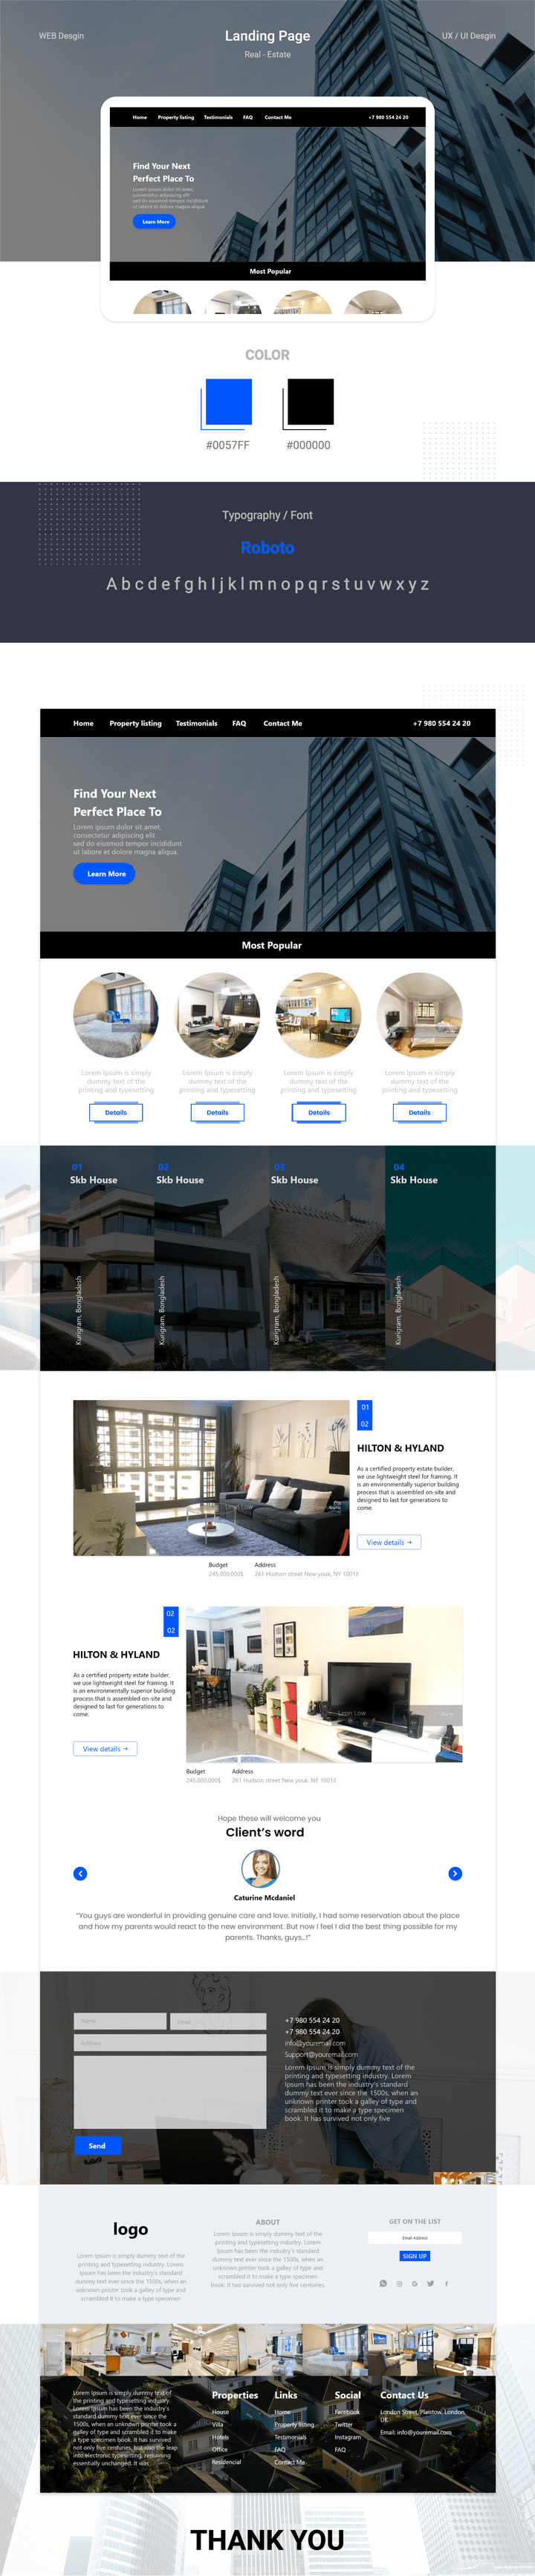 Landing Page for Real - Estate